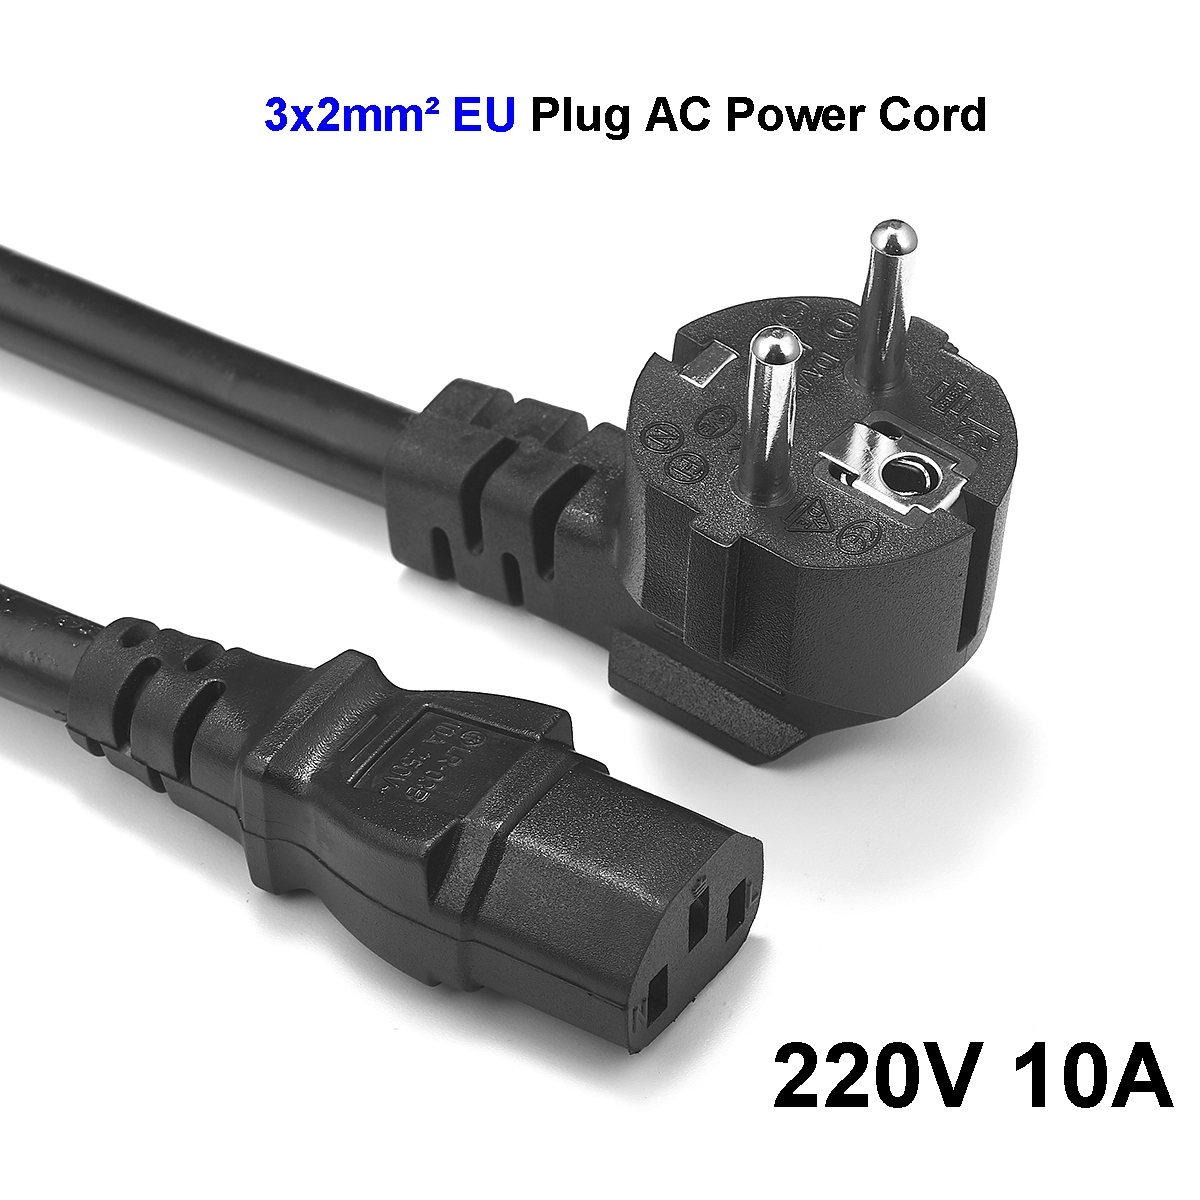 EU Power Supply Cord 2mm2 Schuko to IEC C13 Power Cable 1.5m 3m 5m For PC Computer PSU Antminer Speakers Pressure Cooker